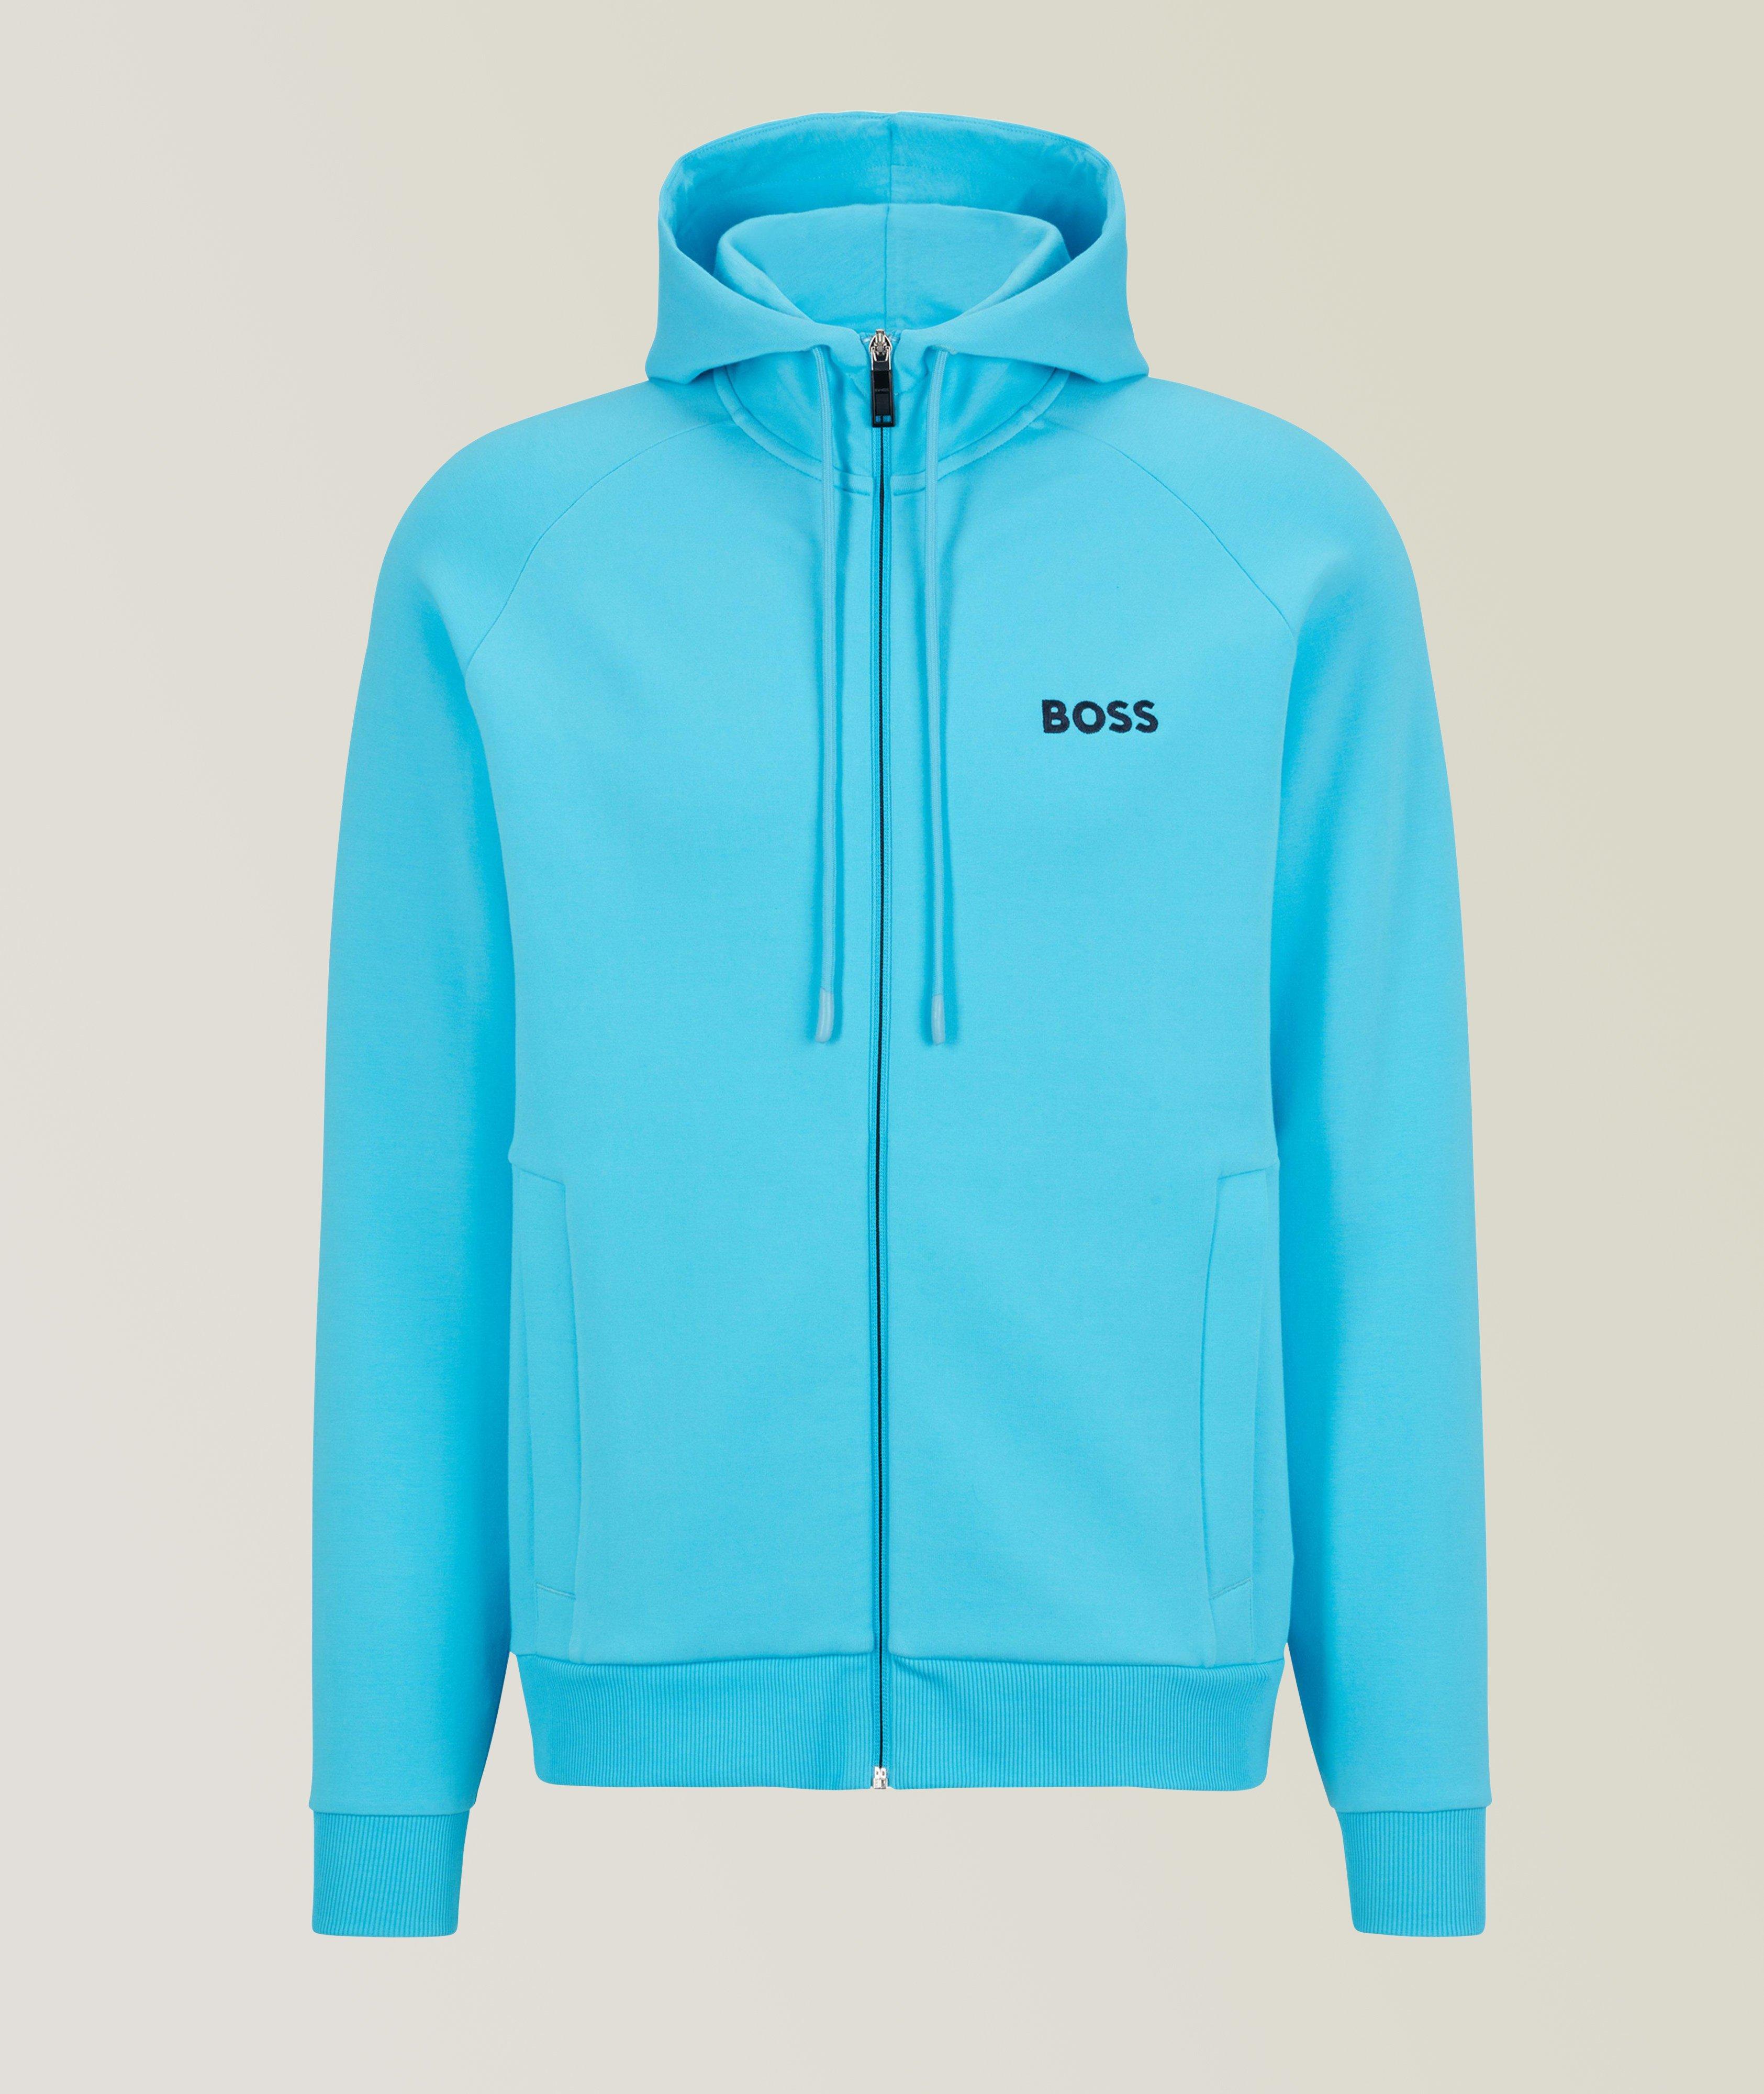 Cotton-Blend Zip-Up Logo Hooded Sweater image 0